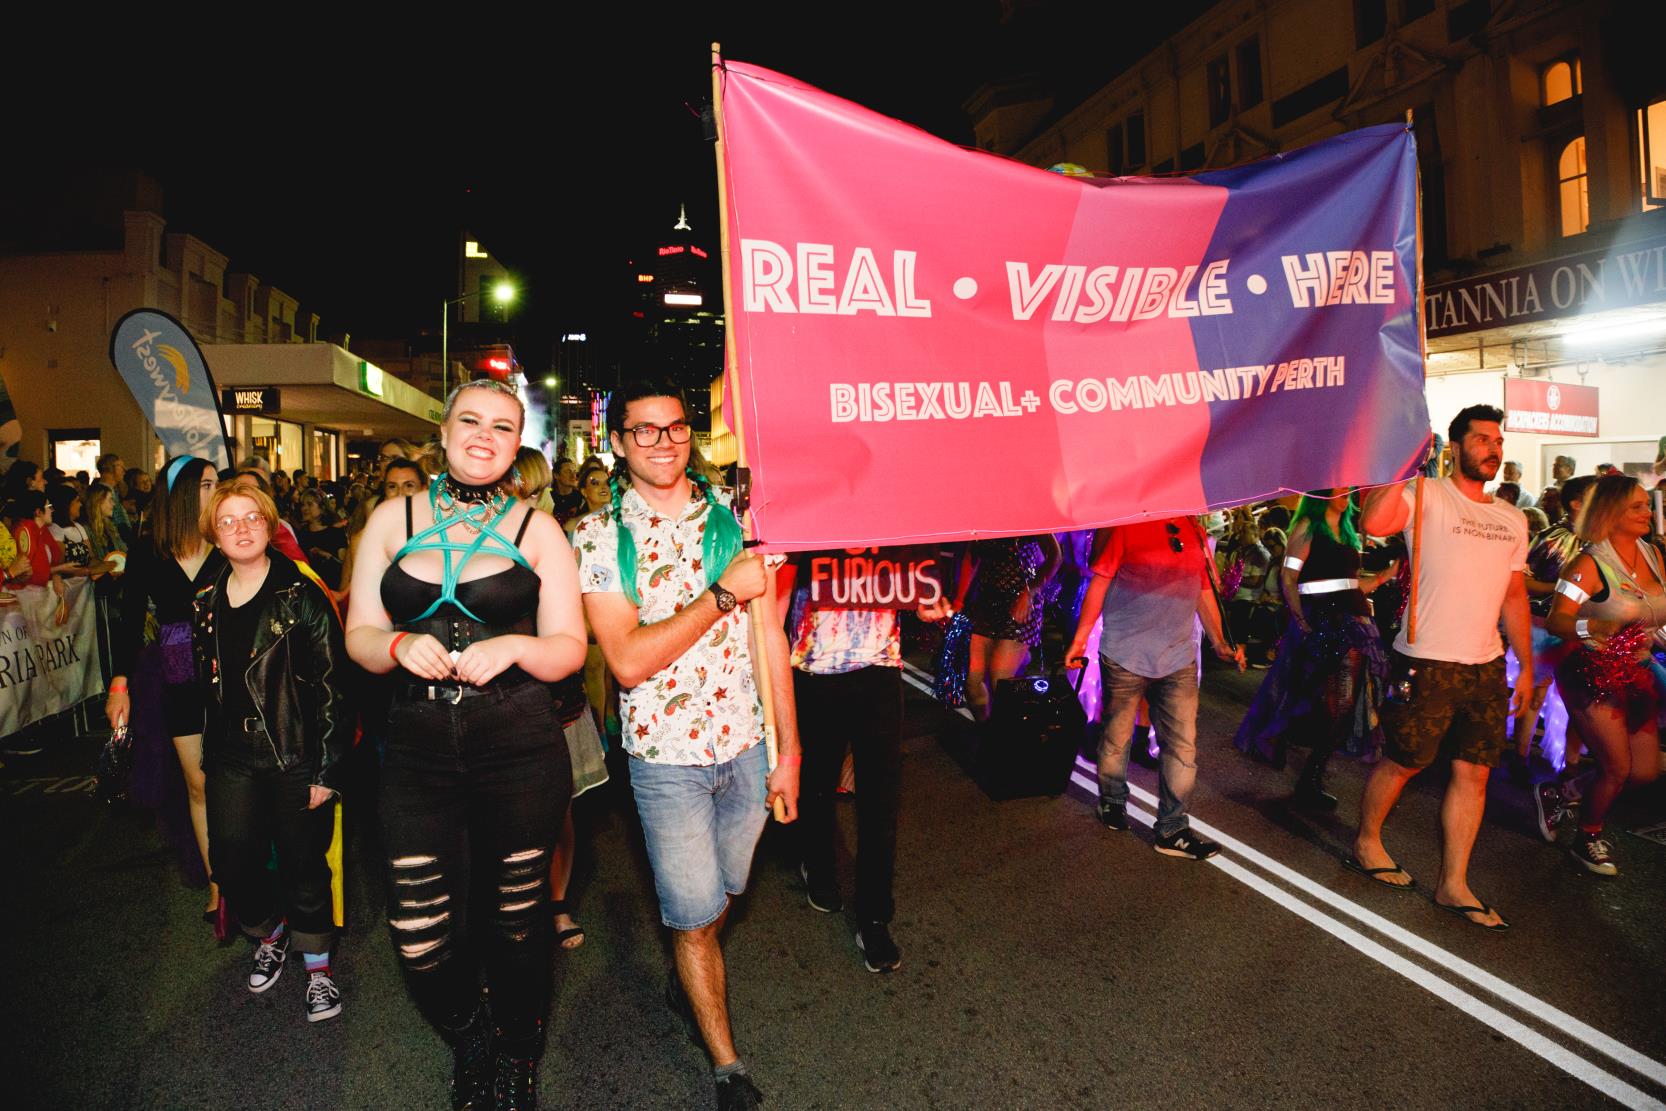 Pride parade participants holding sign that says 'Real. Visible. Here. Bisexual+ Community Perth'